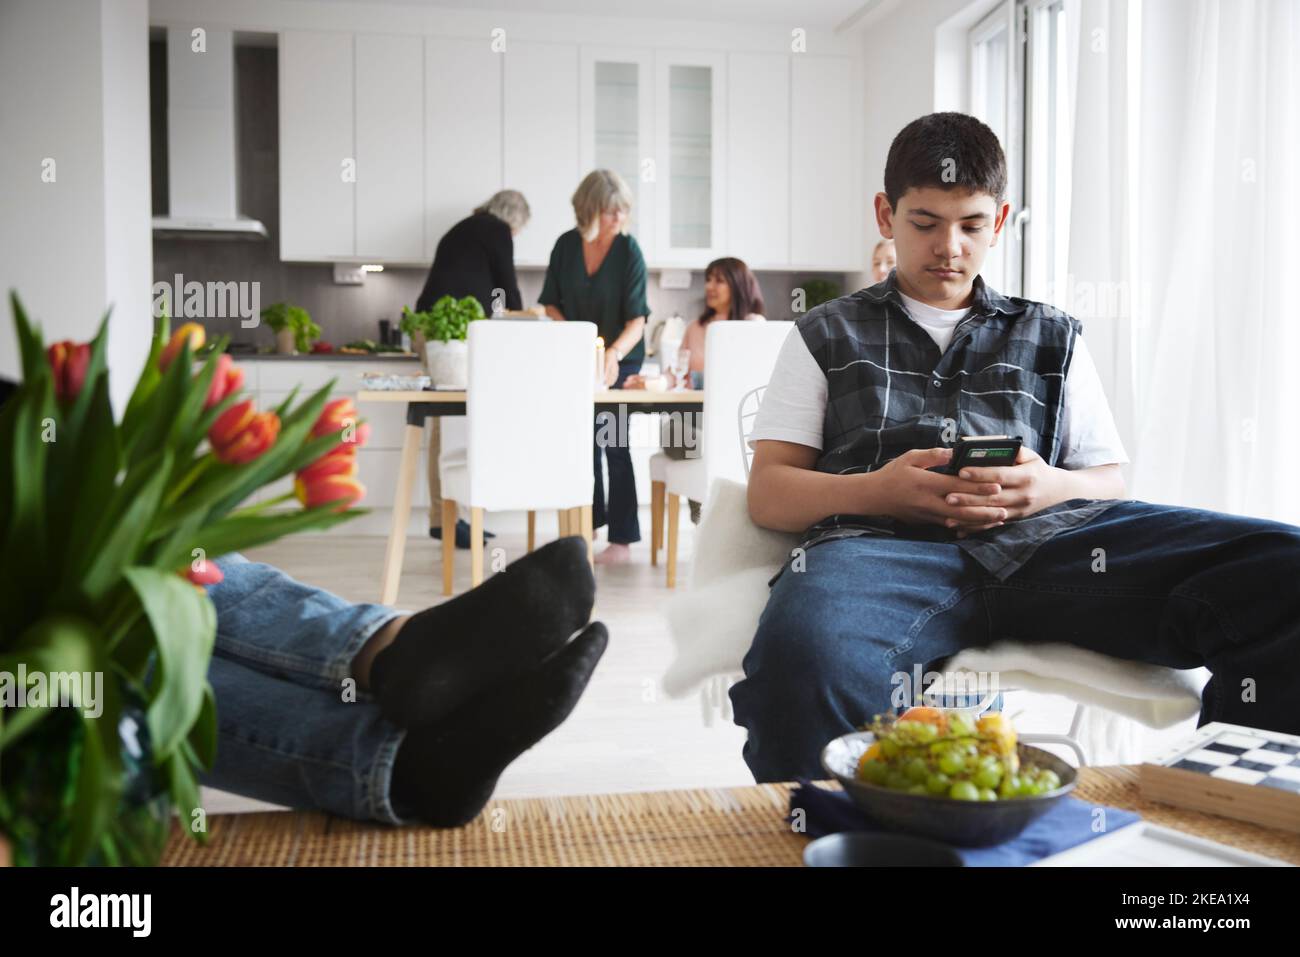 Teenage boy sitting in living room and using phone Stock Photo